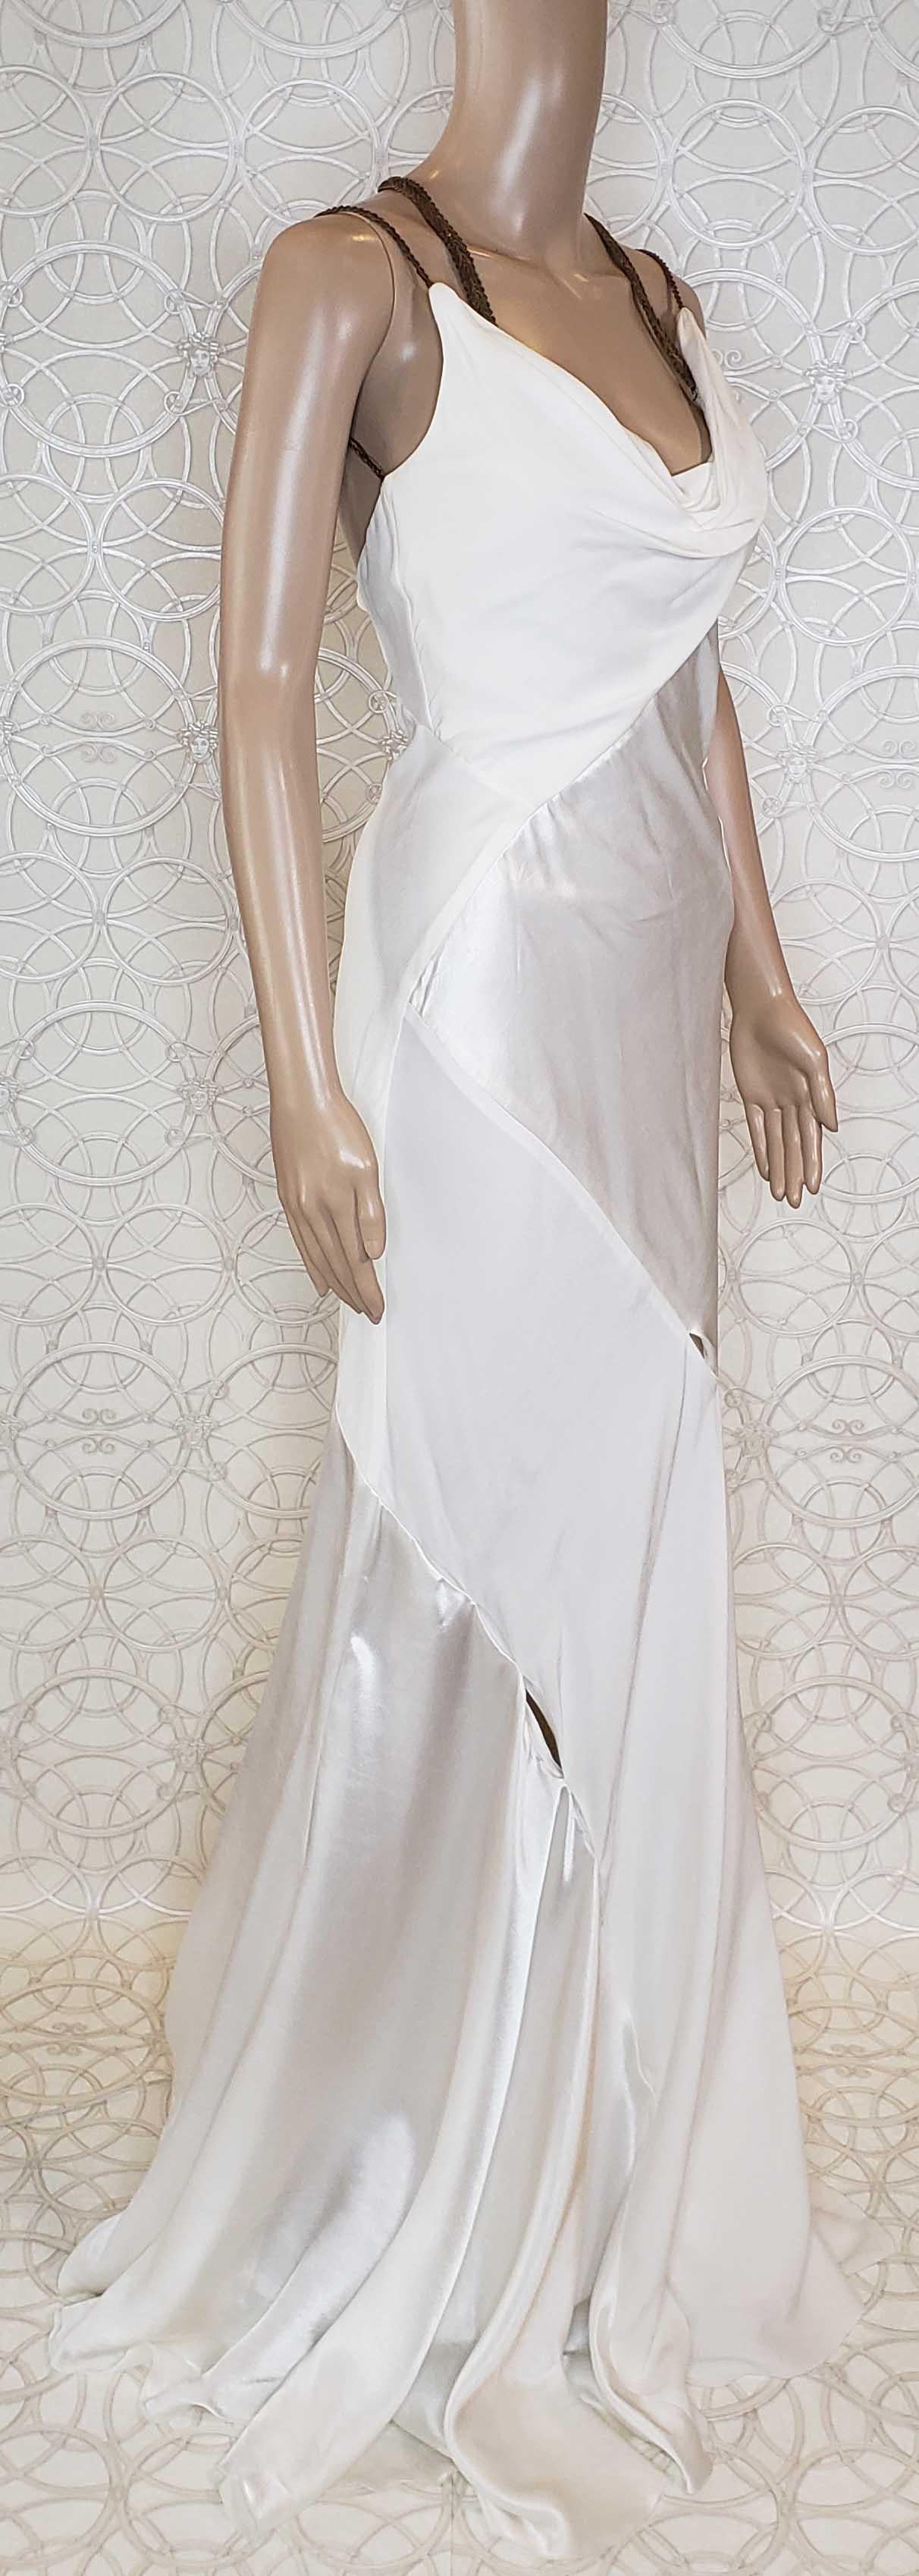 F/W 2014 Look # 51 NEW VERSACE WHITE GOWN DRESS as seen on Heidi 38 - 2 For Sale 6